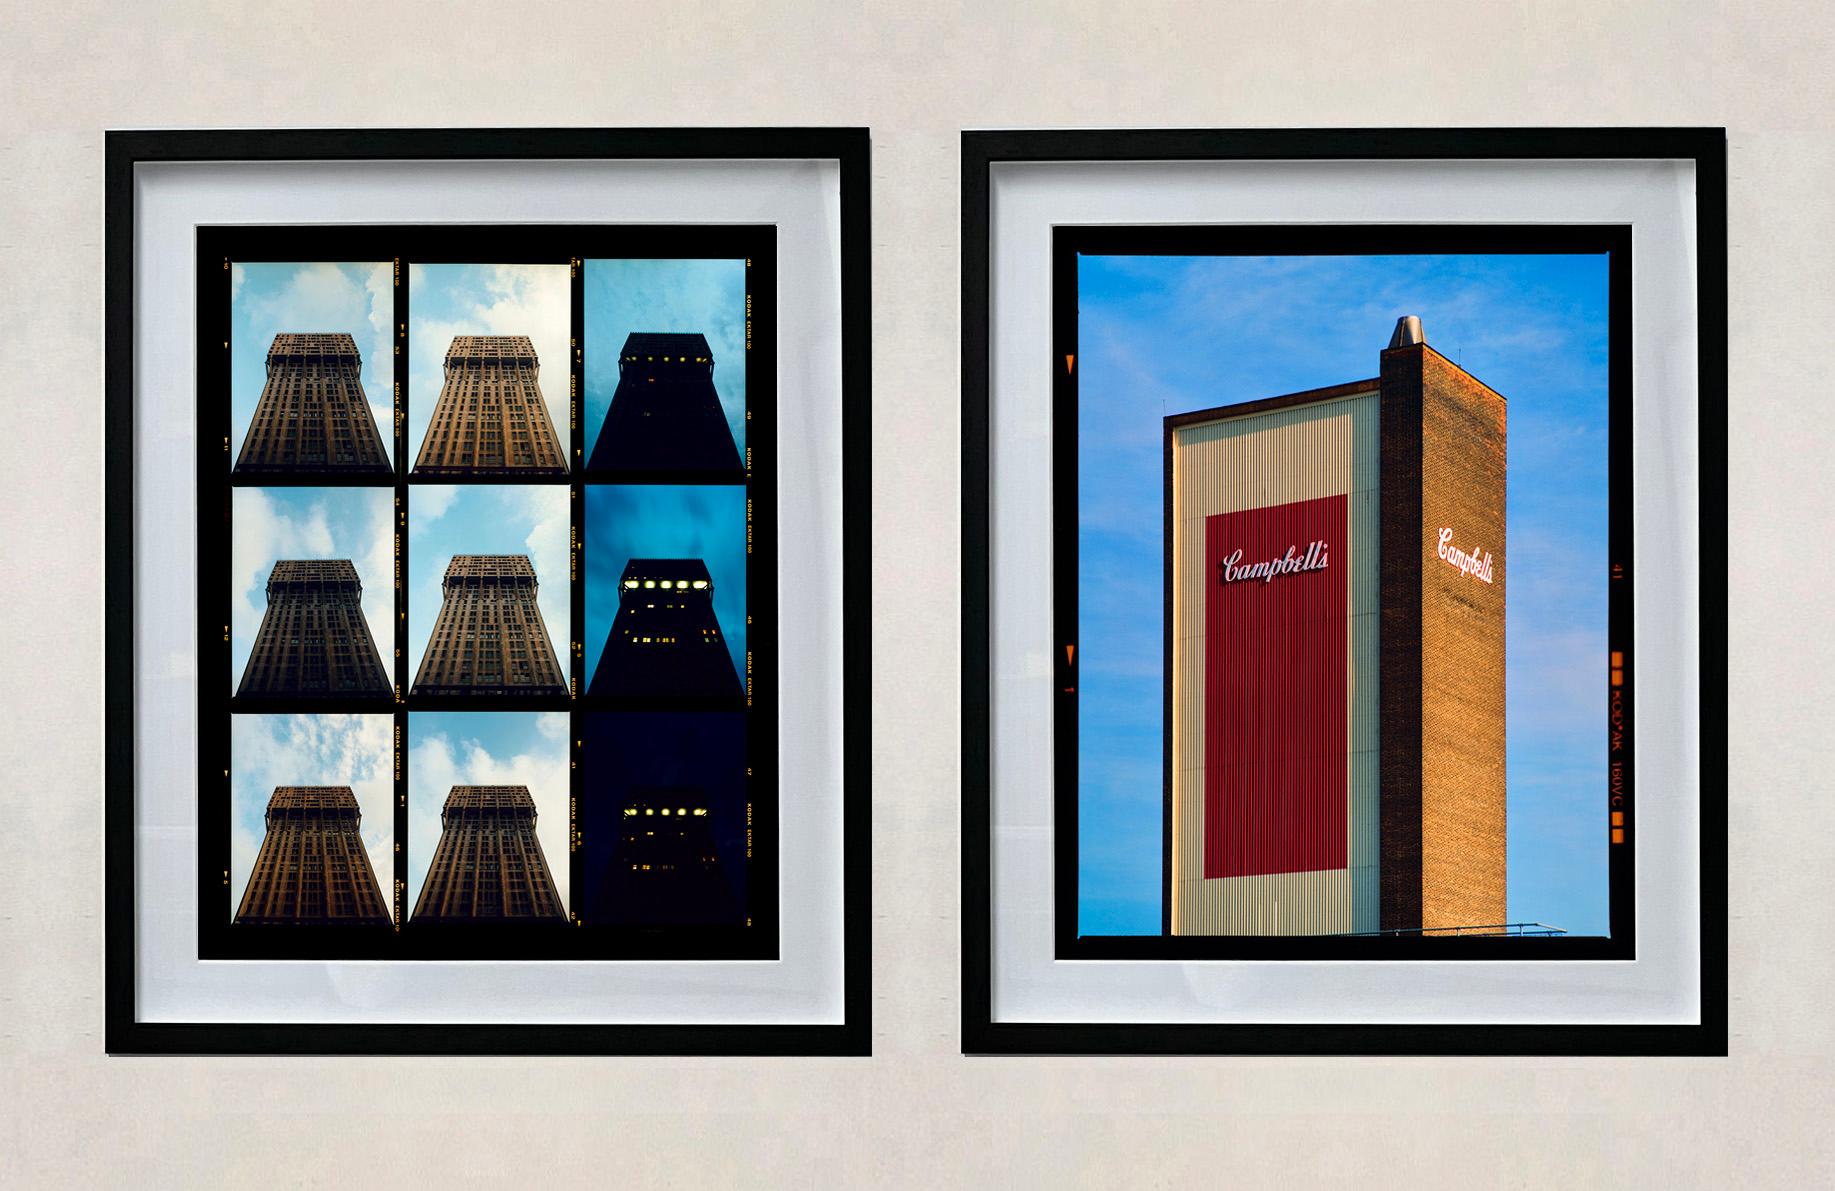 Campbell's Soup, iconic British architecture of their first UK factory. Photograph by Richard Heeps.

This artwork is a limited edition of 25, gloss photographic print, dry-mounted to aluminium presented in a museum board white window mount and a